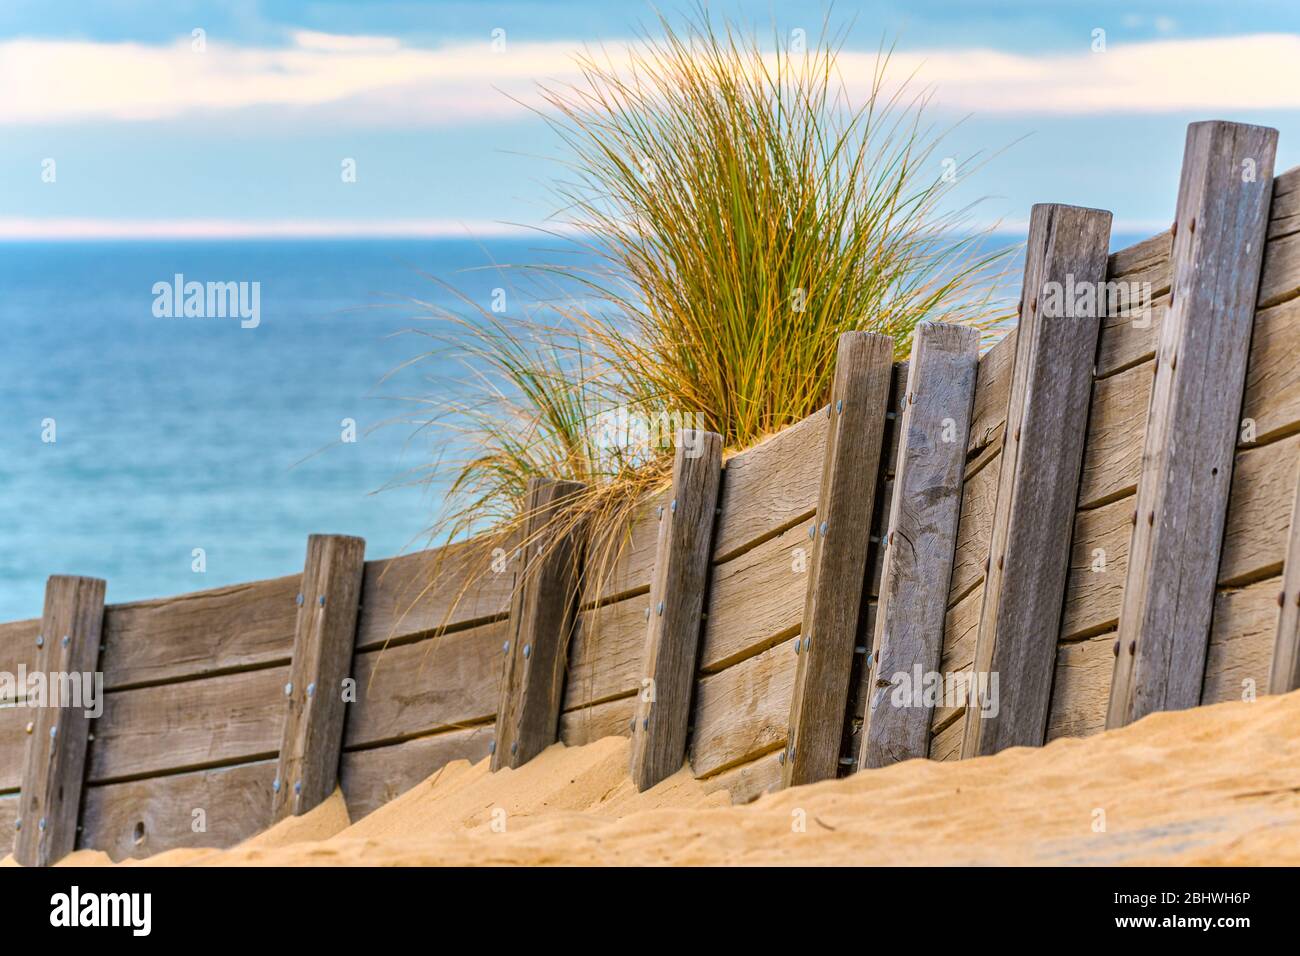 View of the Southern Ocean at Lakes Entrance in Victoria from the leeward side of a wooden windbreak topped with a tussock of grass. Stock Photo